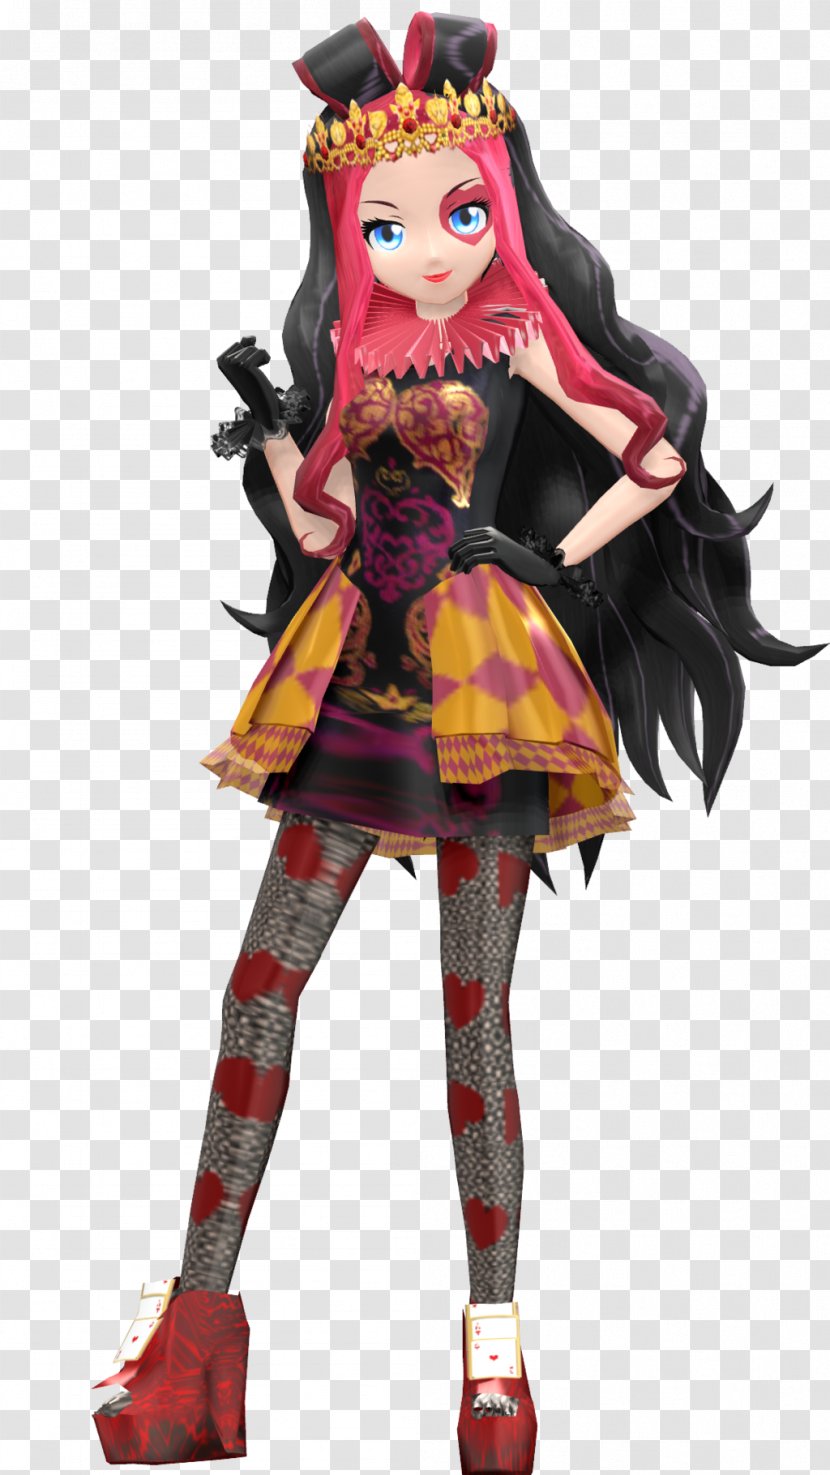 Queen Of Hearts Cheshire Cat Ever After High Alice's Adventures In Wonderland - Work Art - Doll Transparent PNG